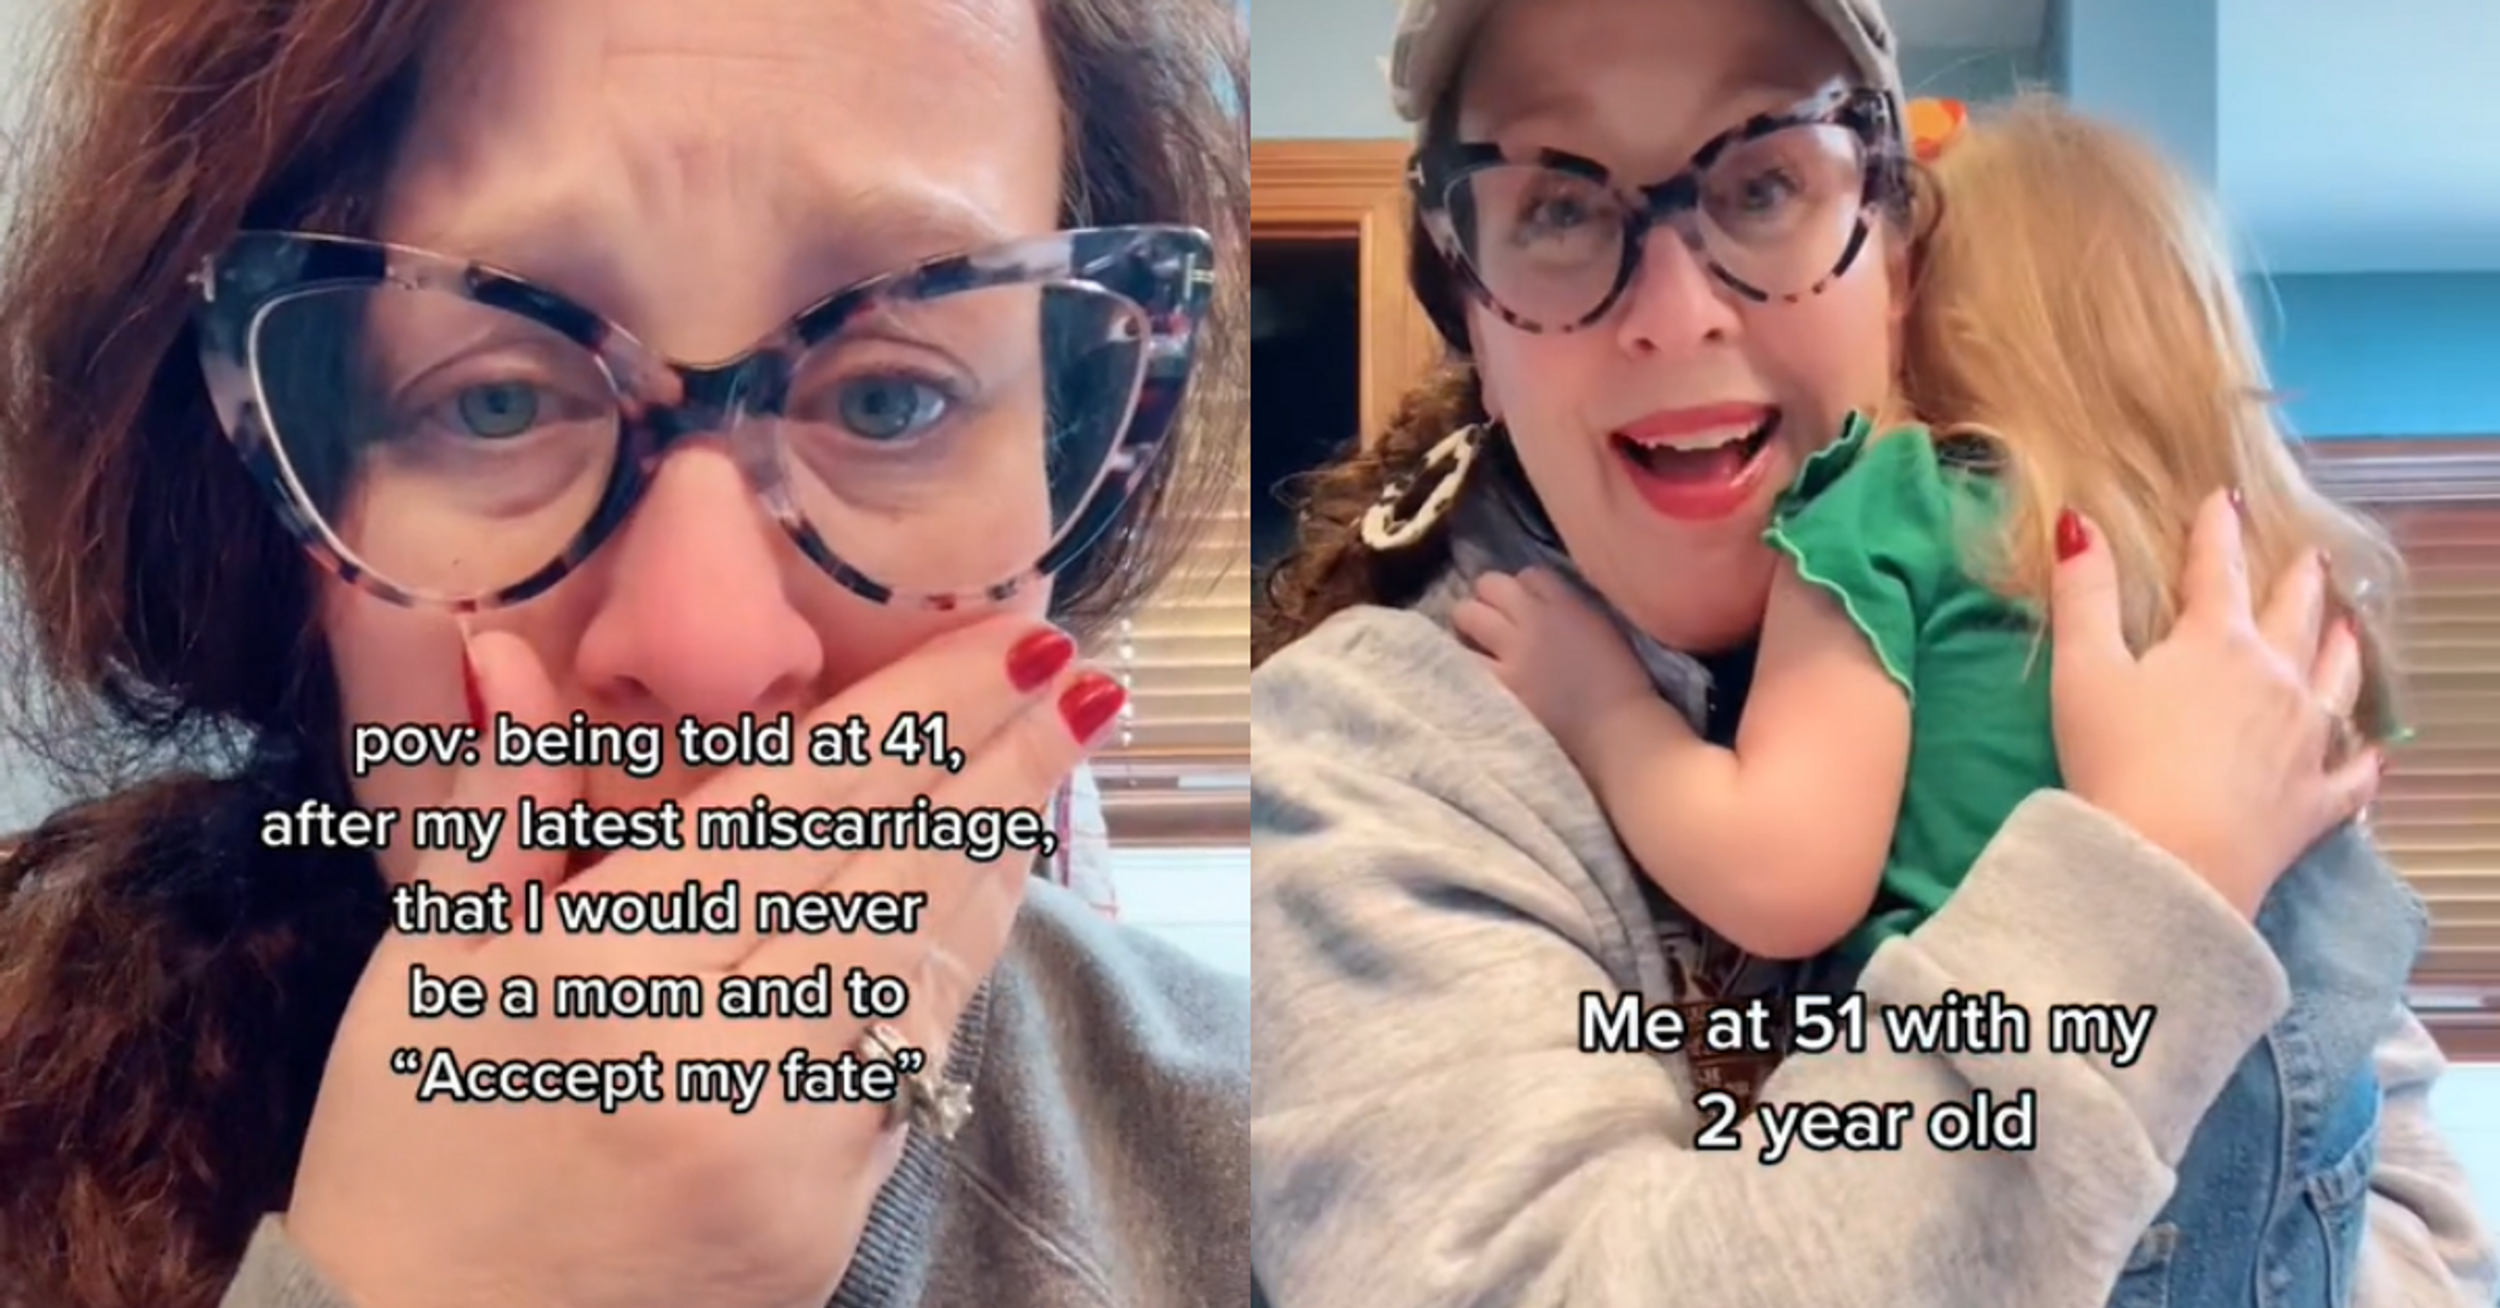 Mom Shares Heartwarming TikTok About Adopting At Age 49—Only To Be Met With Shaming Comments